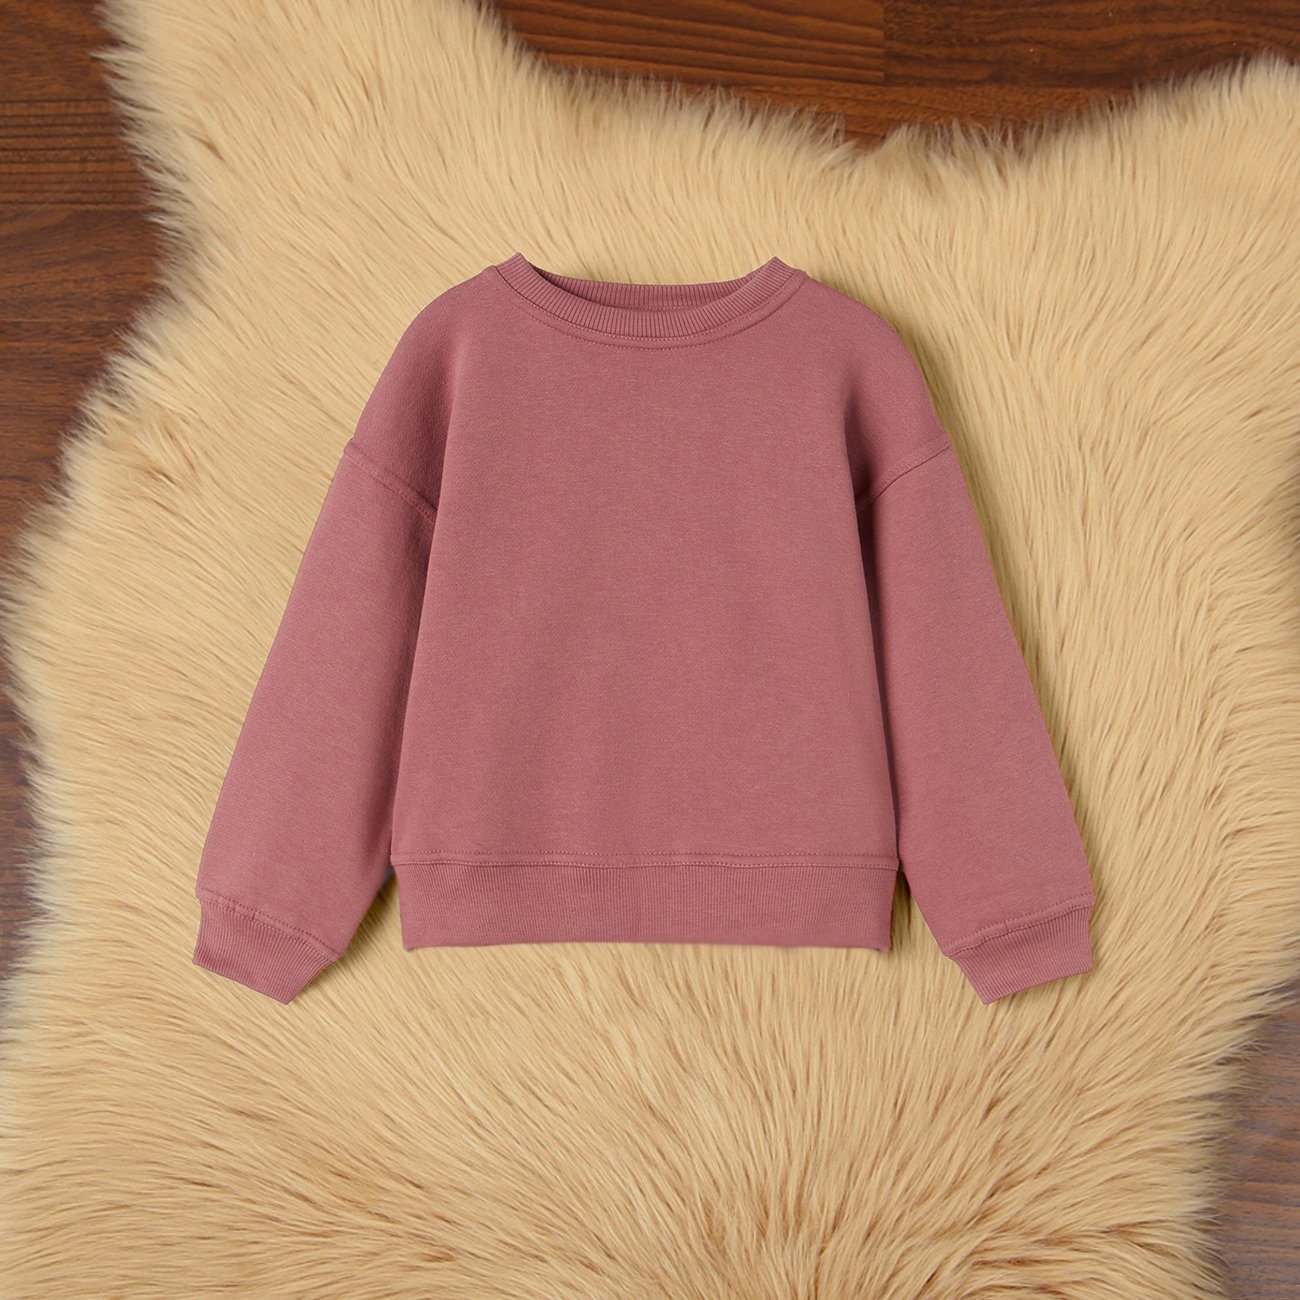 Premium Quality Pink Over-Sized Soft Fleece Sweat Shirt For Girls (20832)